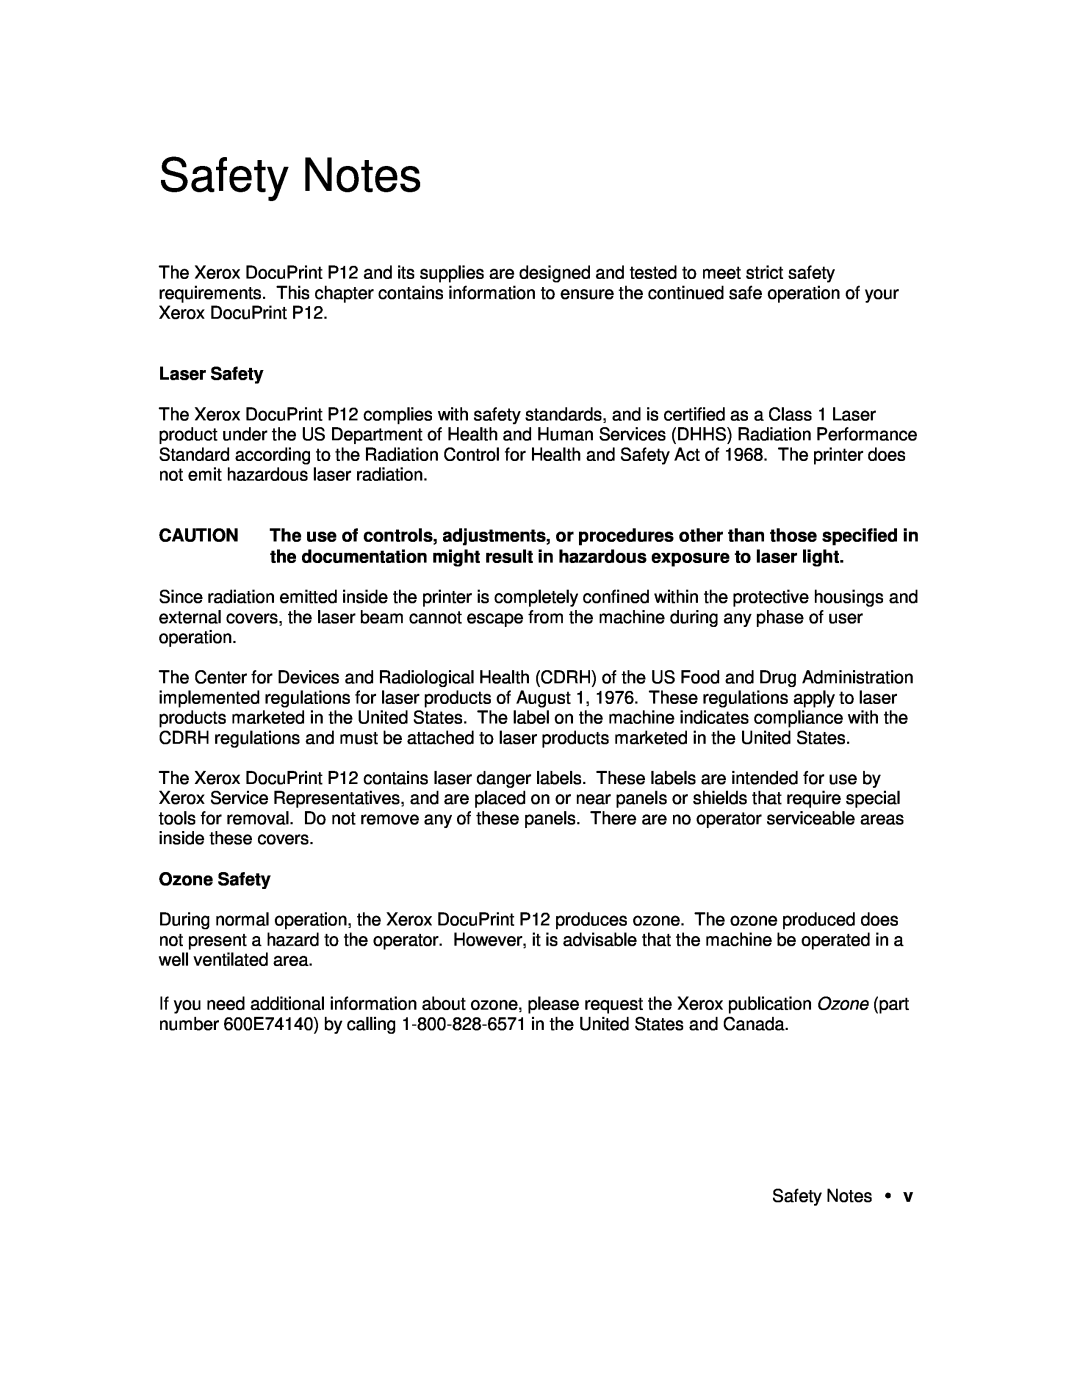 Xerox P12 Safety Notes, Laser Safety, the documentation might result in hazardous exposure to laser light, Ozone Safety 